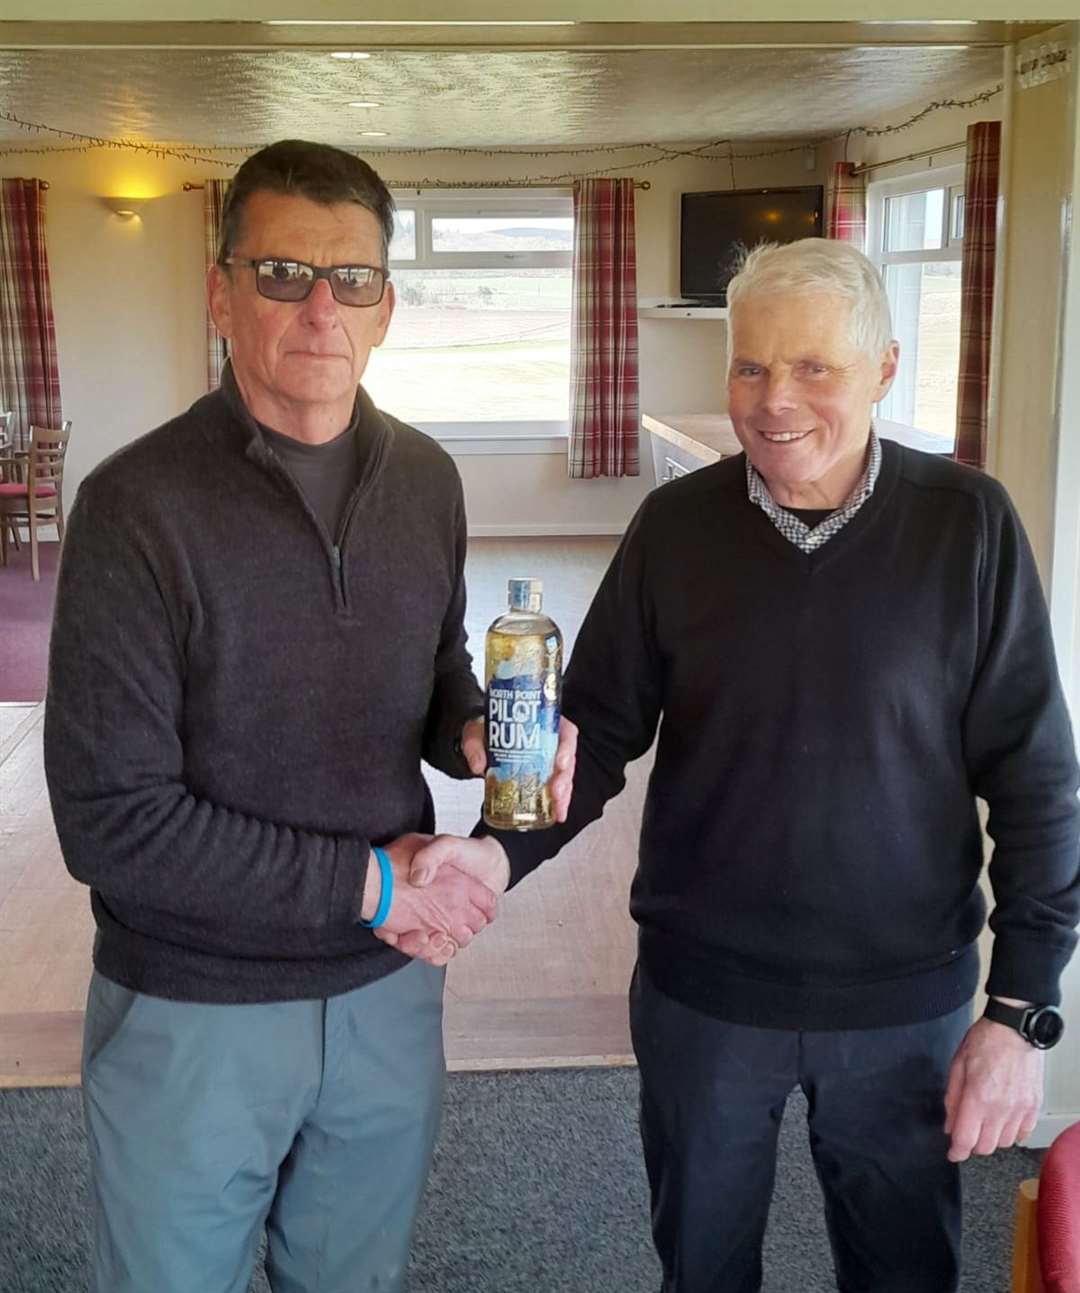 Malcolm Thomson receiving a bottle of North Point Gin from senior section convener Sandy Chisholm after winning the nearest-the-pin prize in the latest round of the Senior Stableford competition.